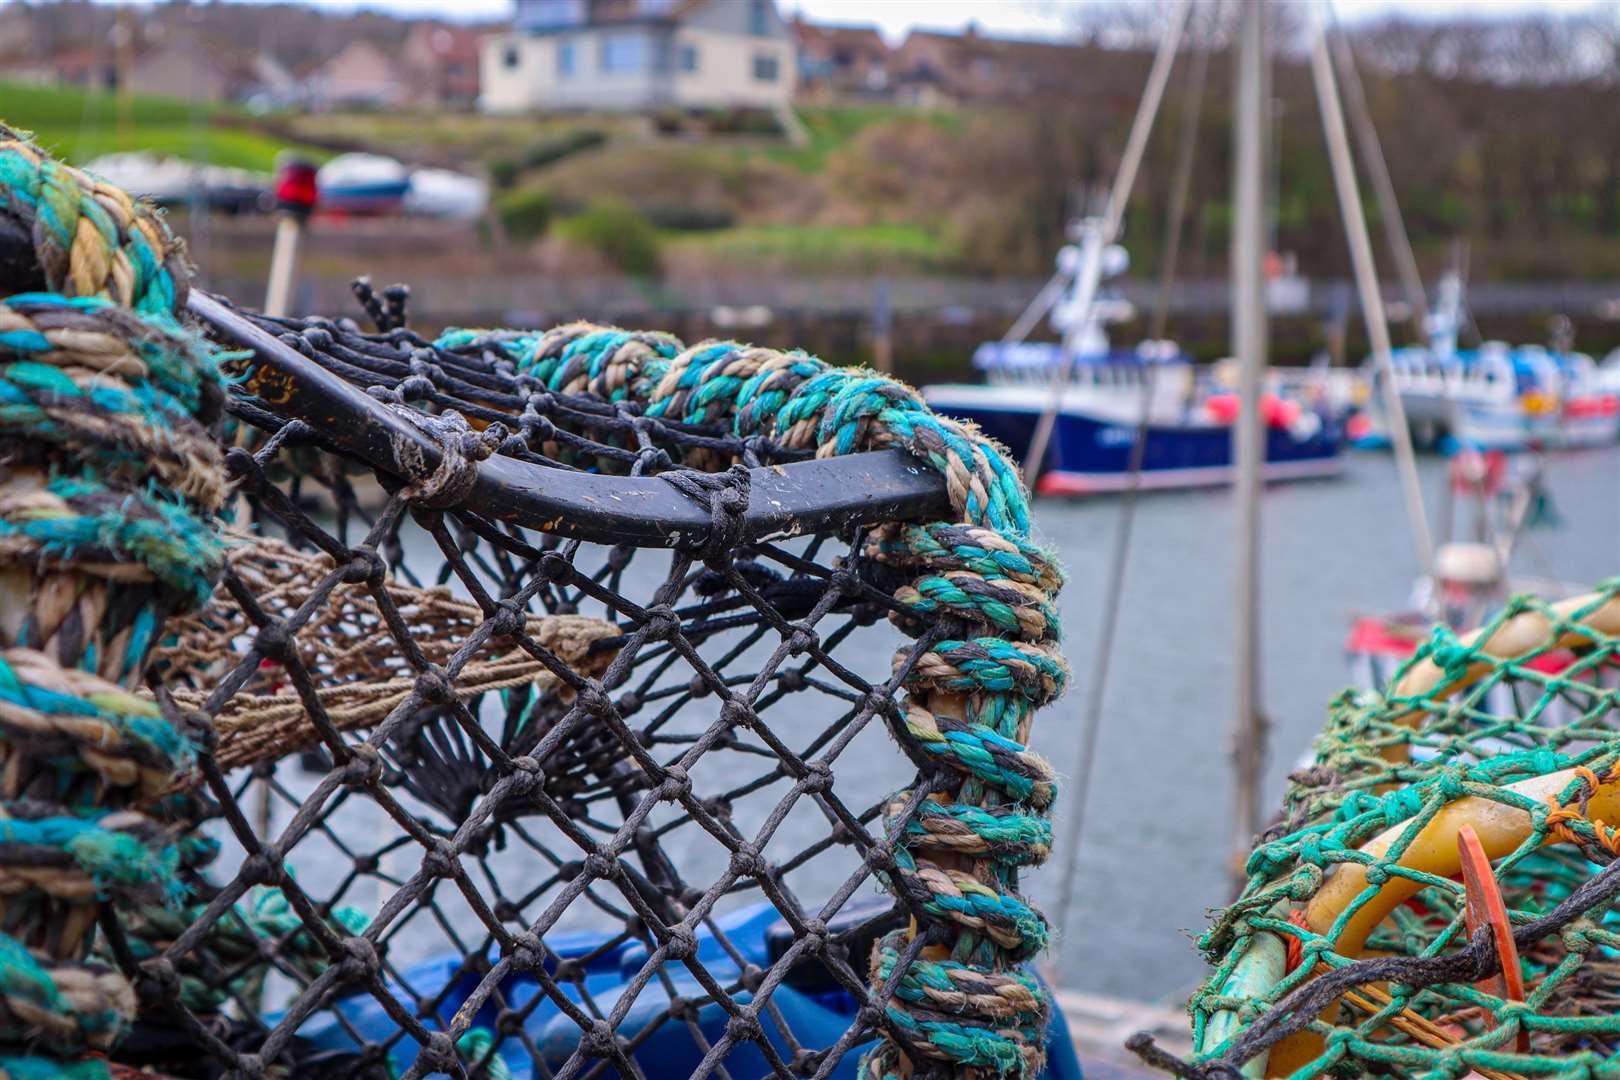 A new poll by the Scottish Fishermen's Federation underscores strong public support for protecting the industry as it faces pressures from new marine users.